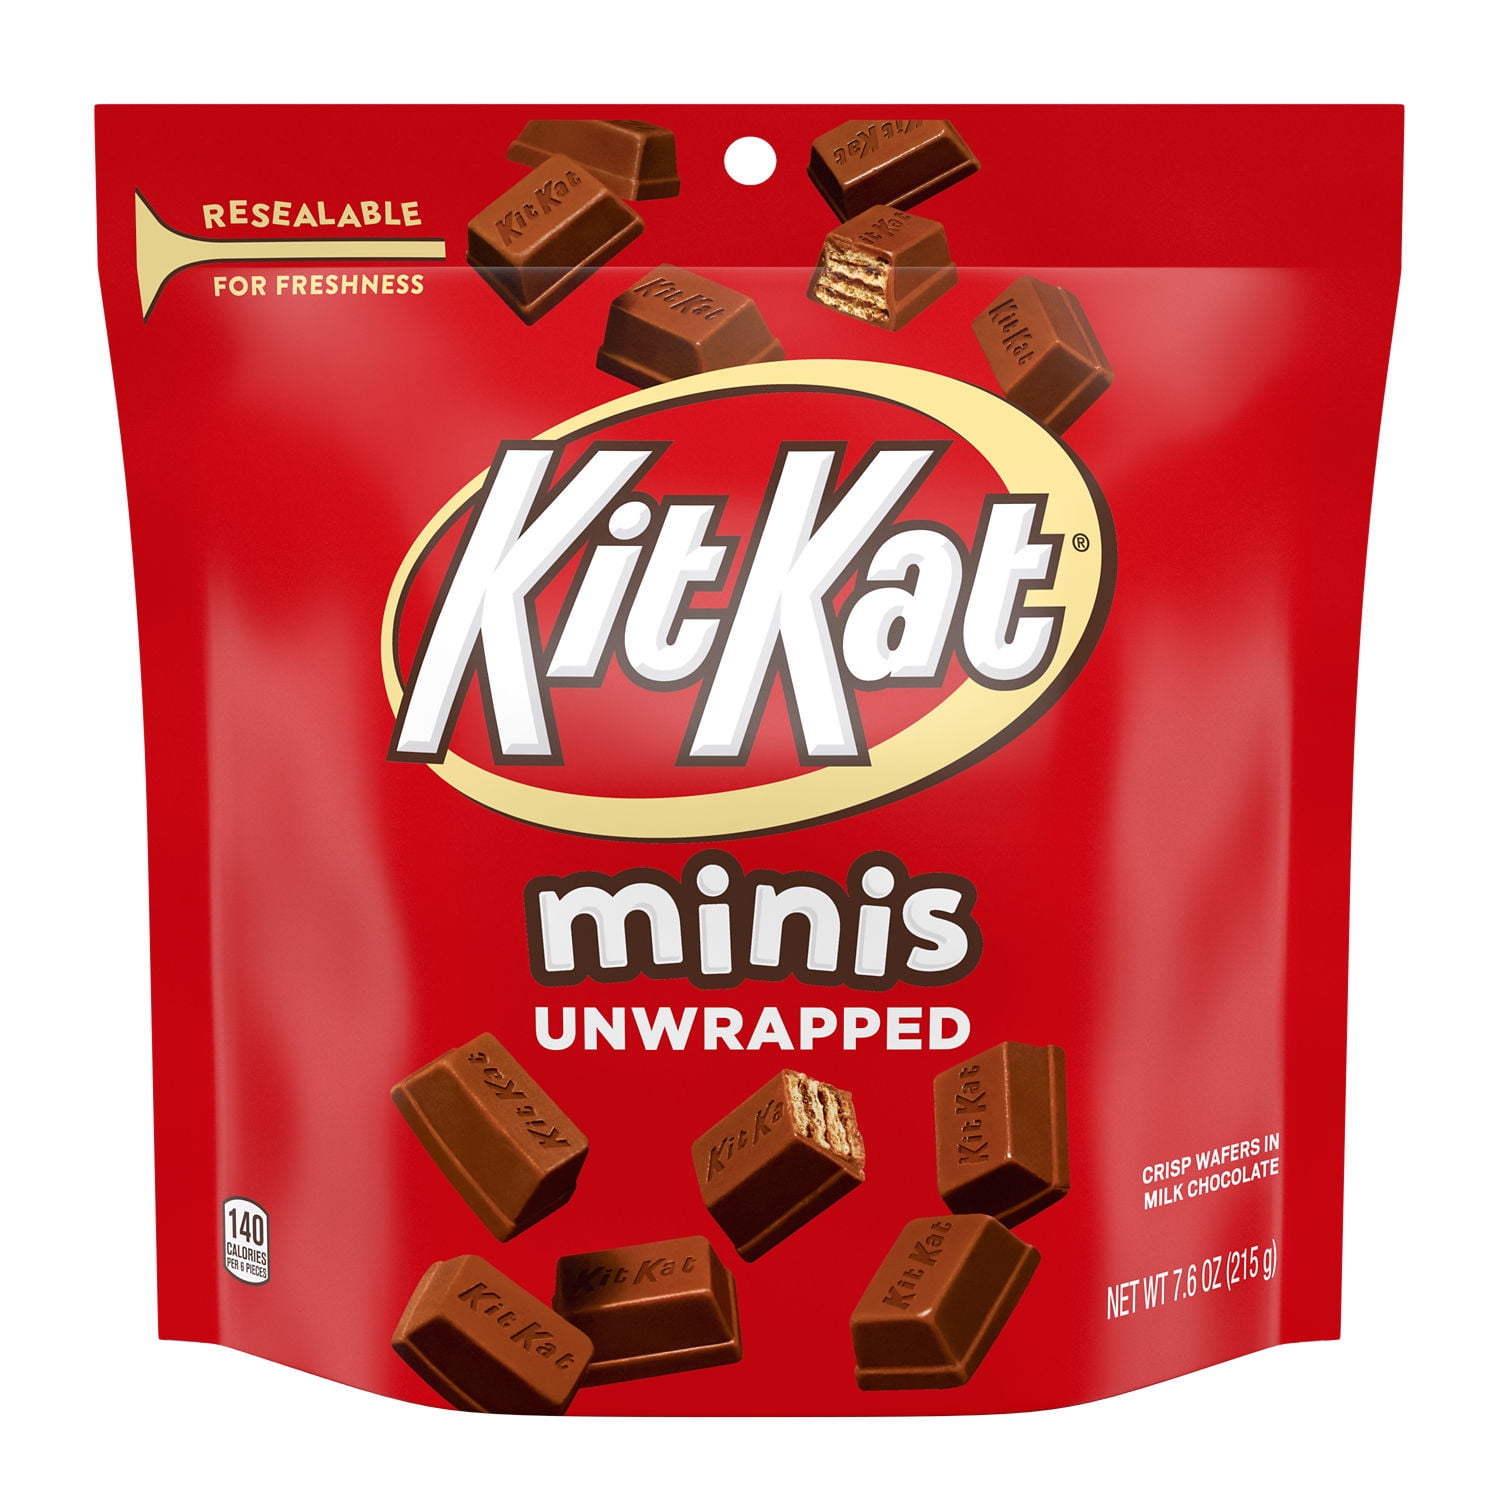 KIT KAT Minis Unwrapped Milk Chocolate Wafer Candy Bar, 7.6 oz, Resealable Pouch